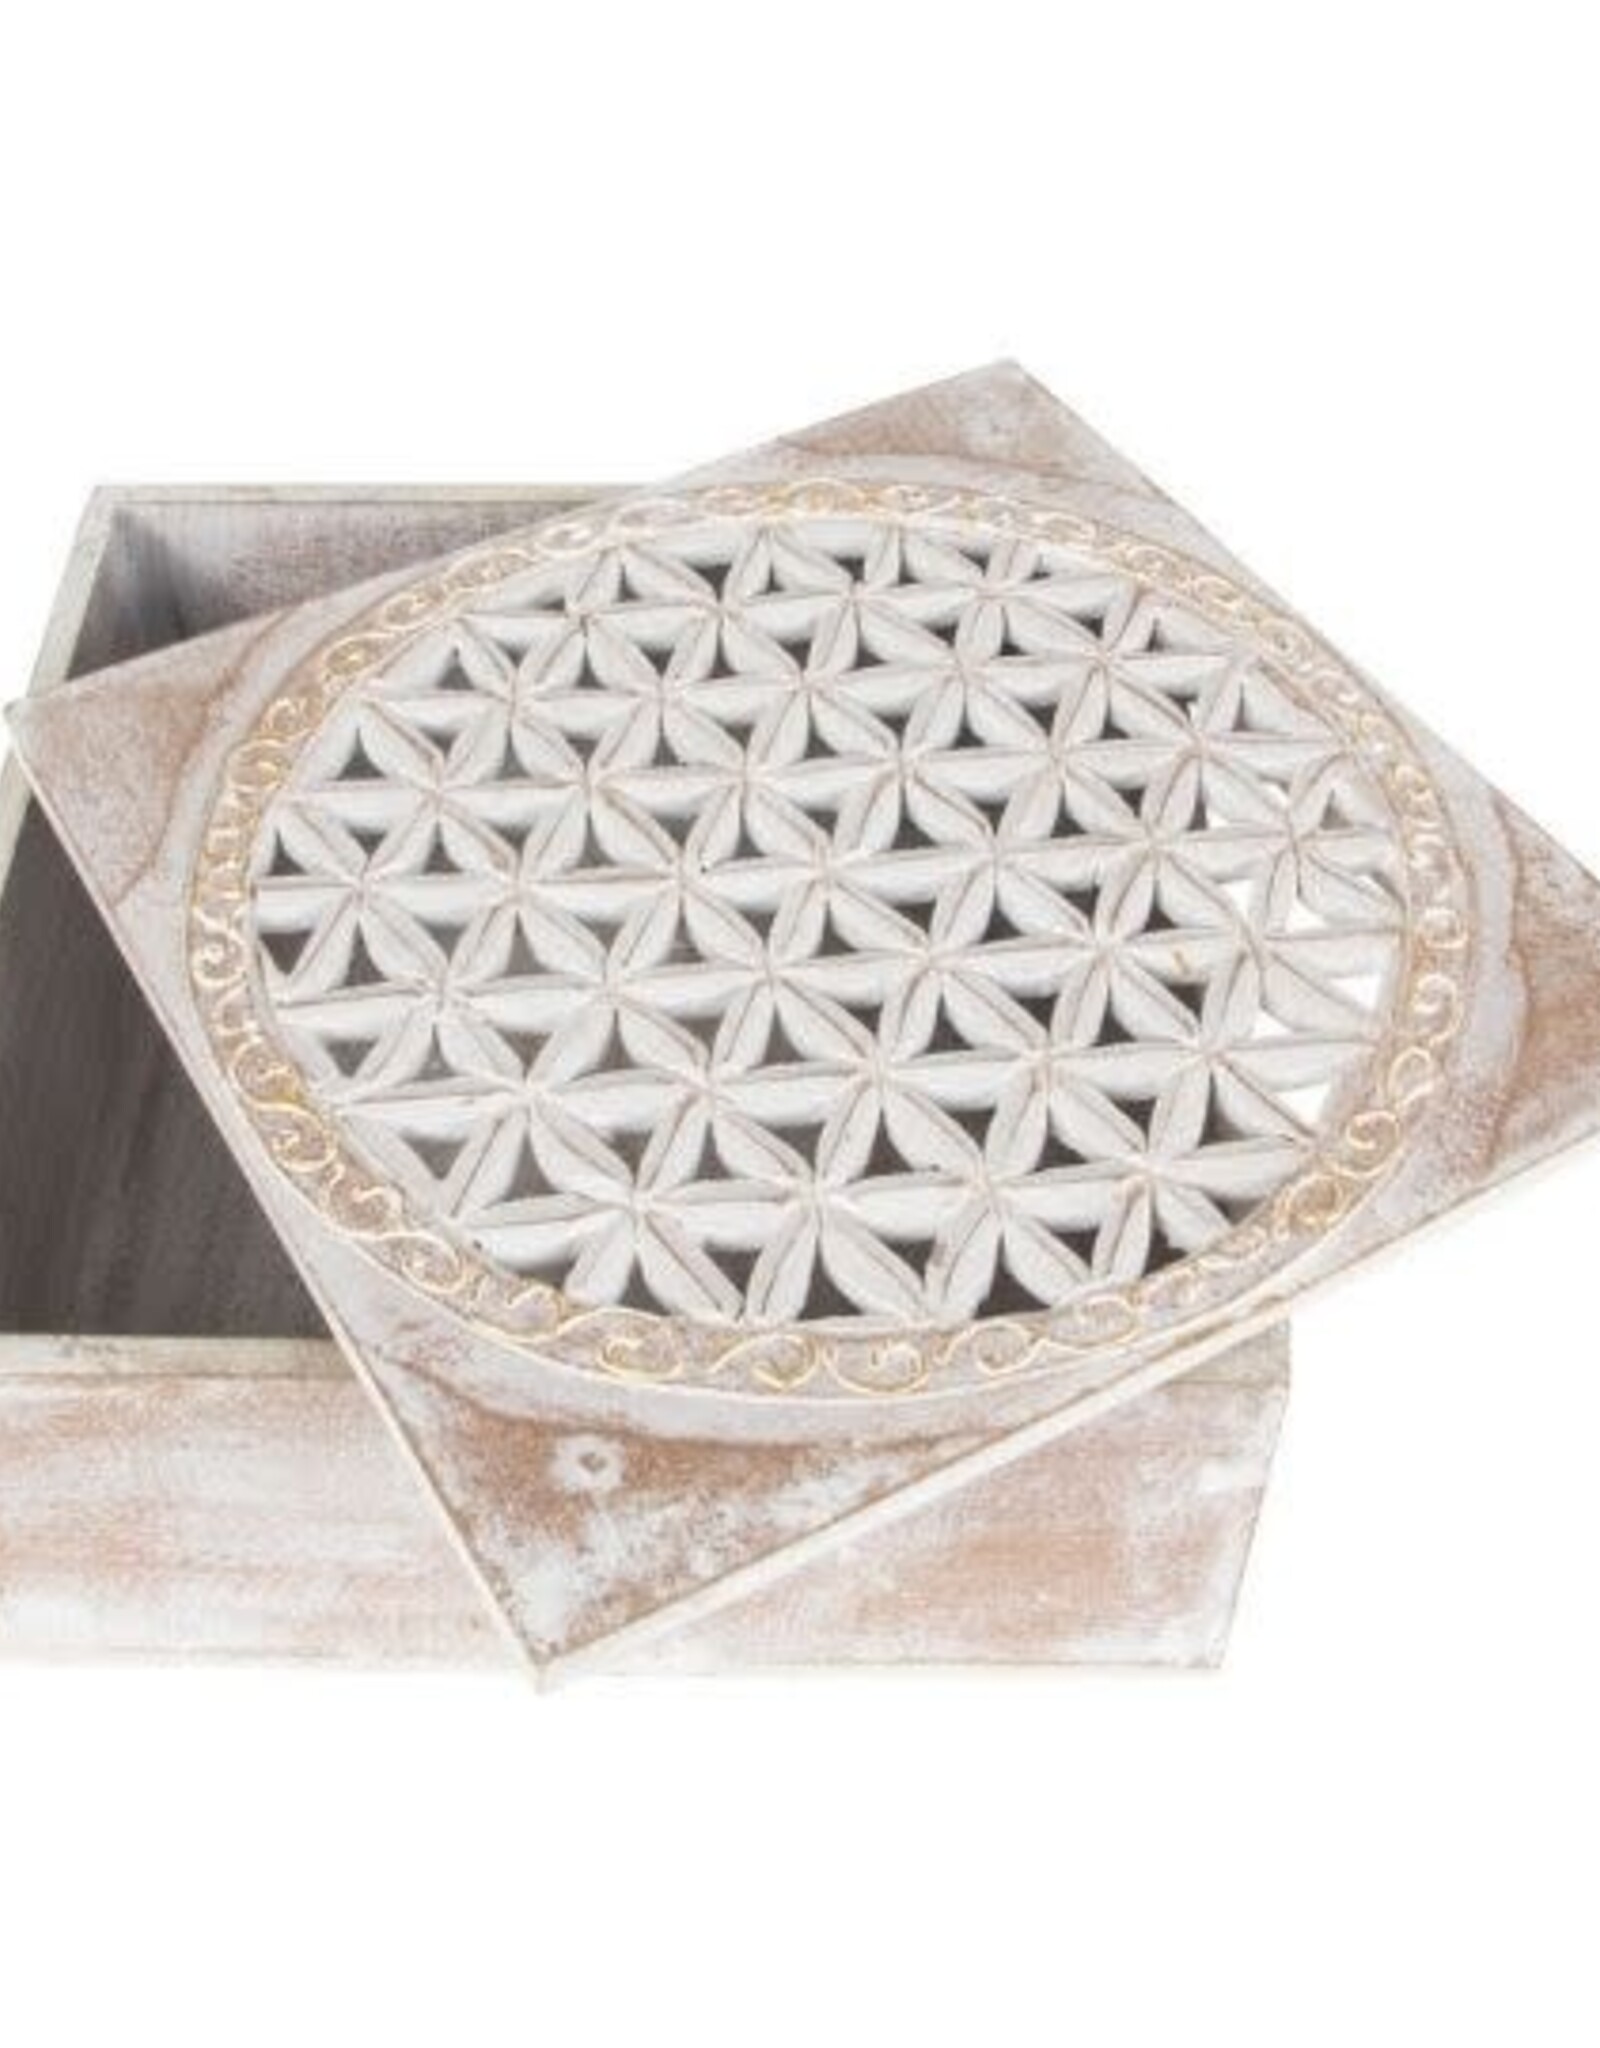 Wood Box Washed Flower of Life w Carved Lid 8x 8 x 3.5"H